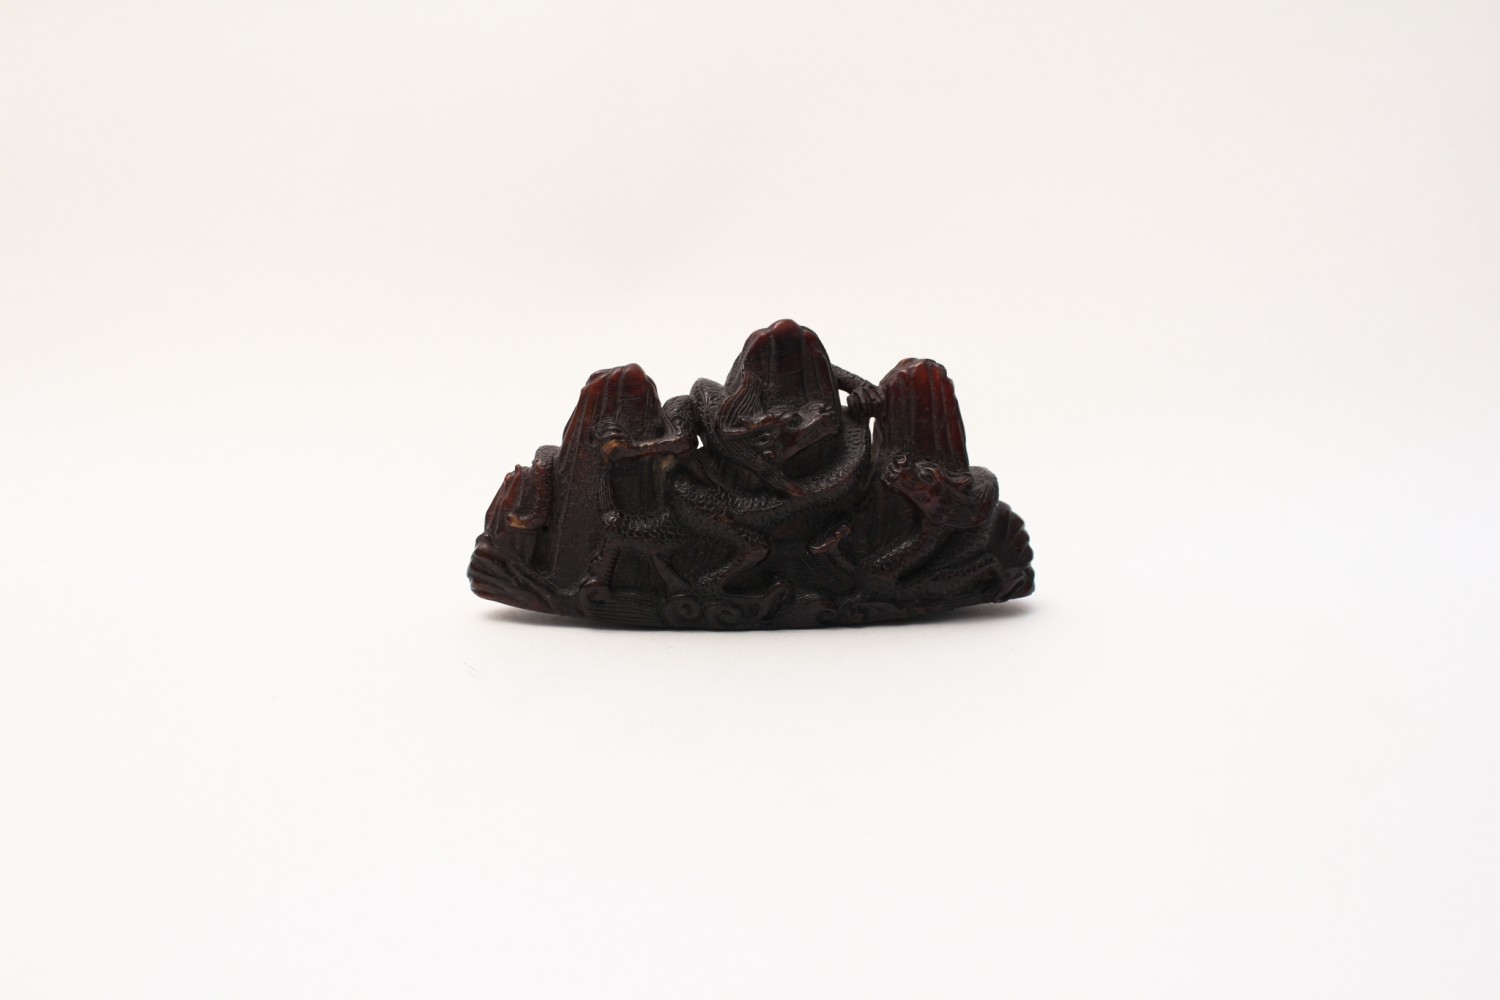 An amber brush rest depicting a dragon amidst mountains